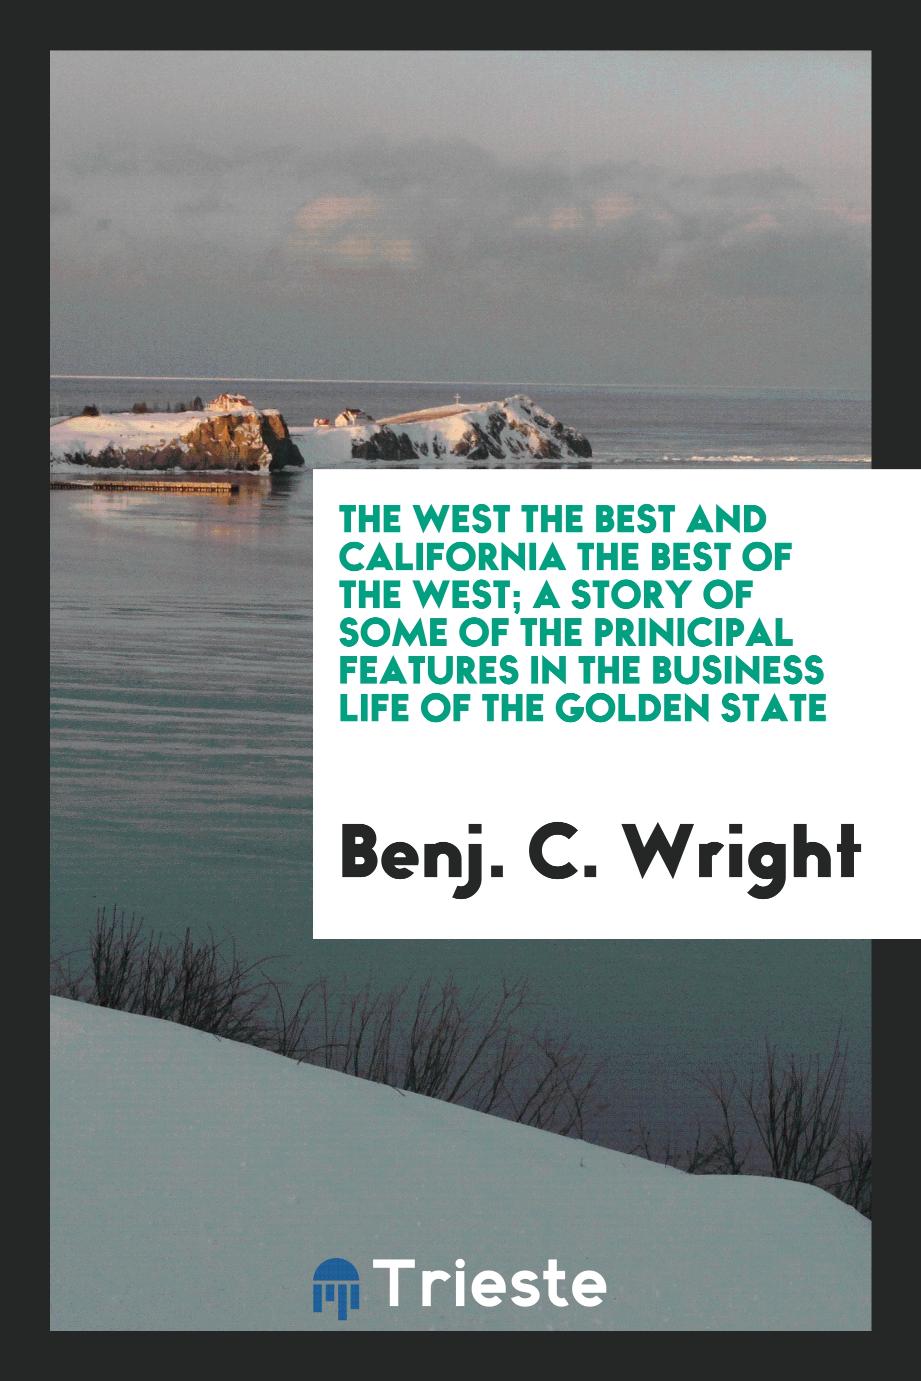 The West the best and California the best of the West; a story of some of the prinicipal features in the business life of the golden state